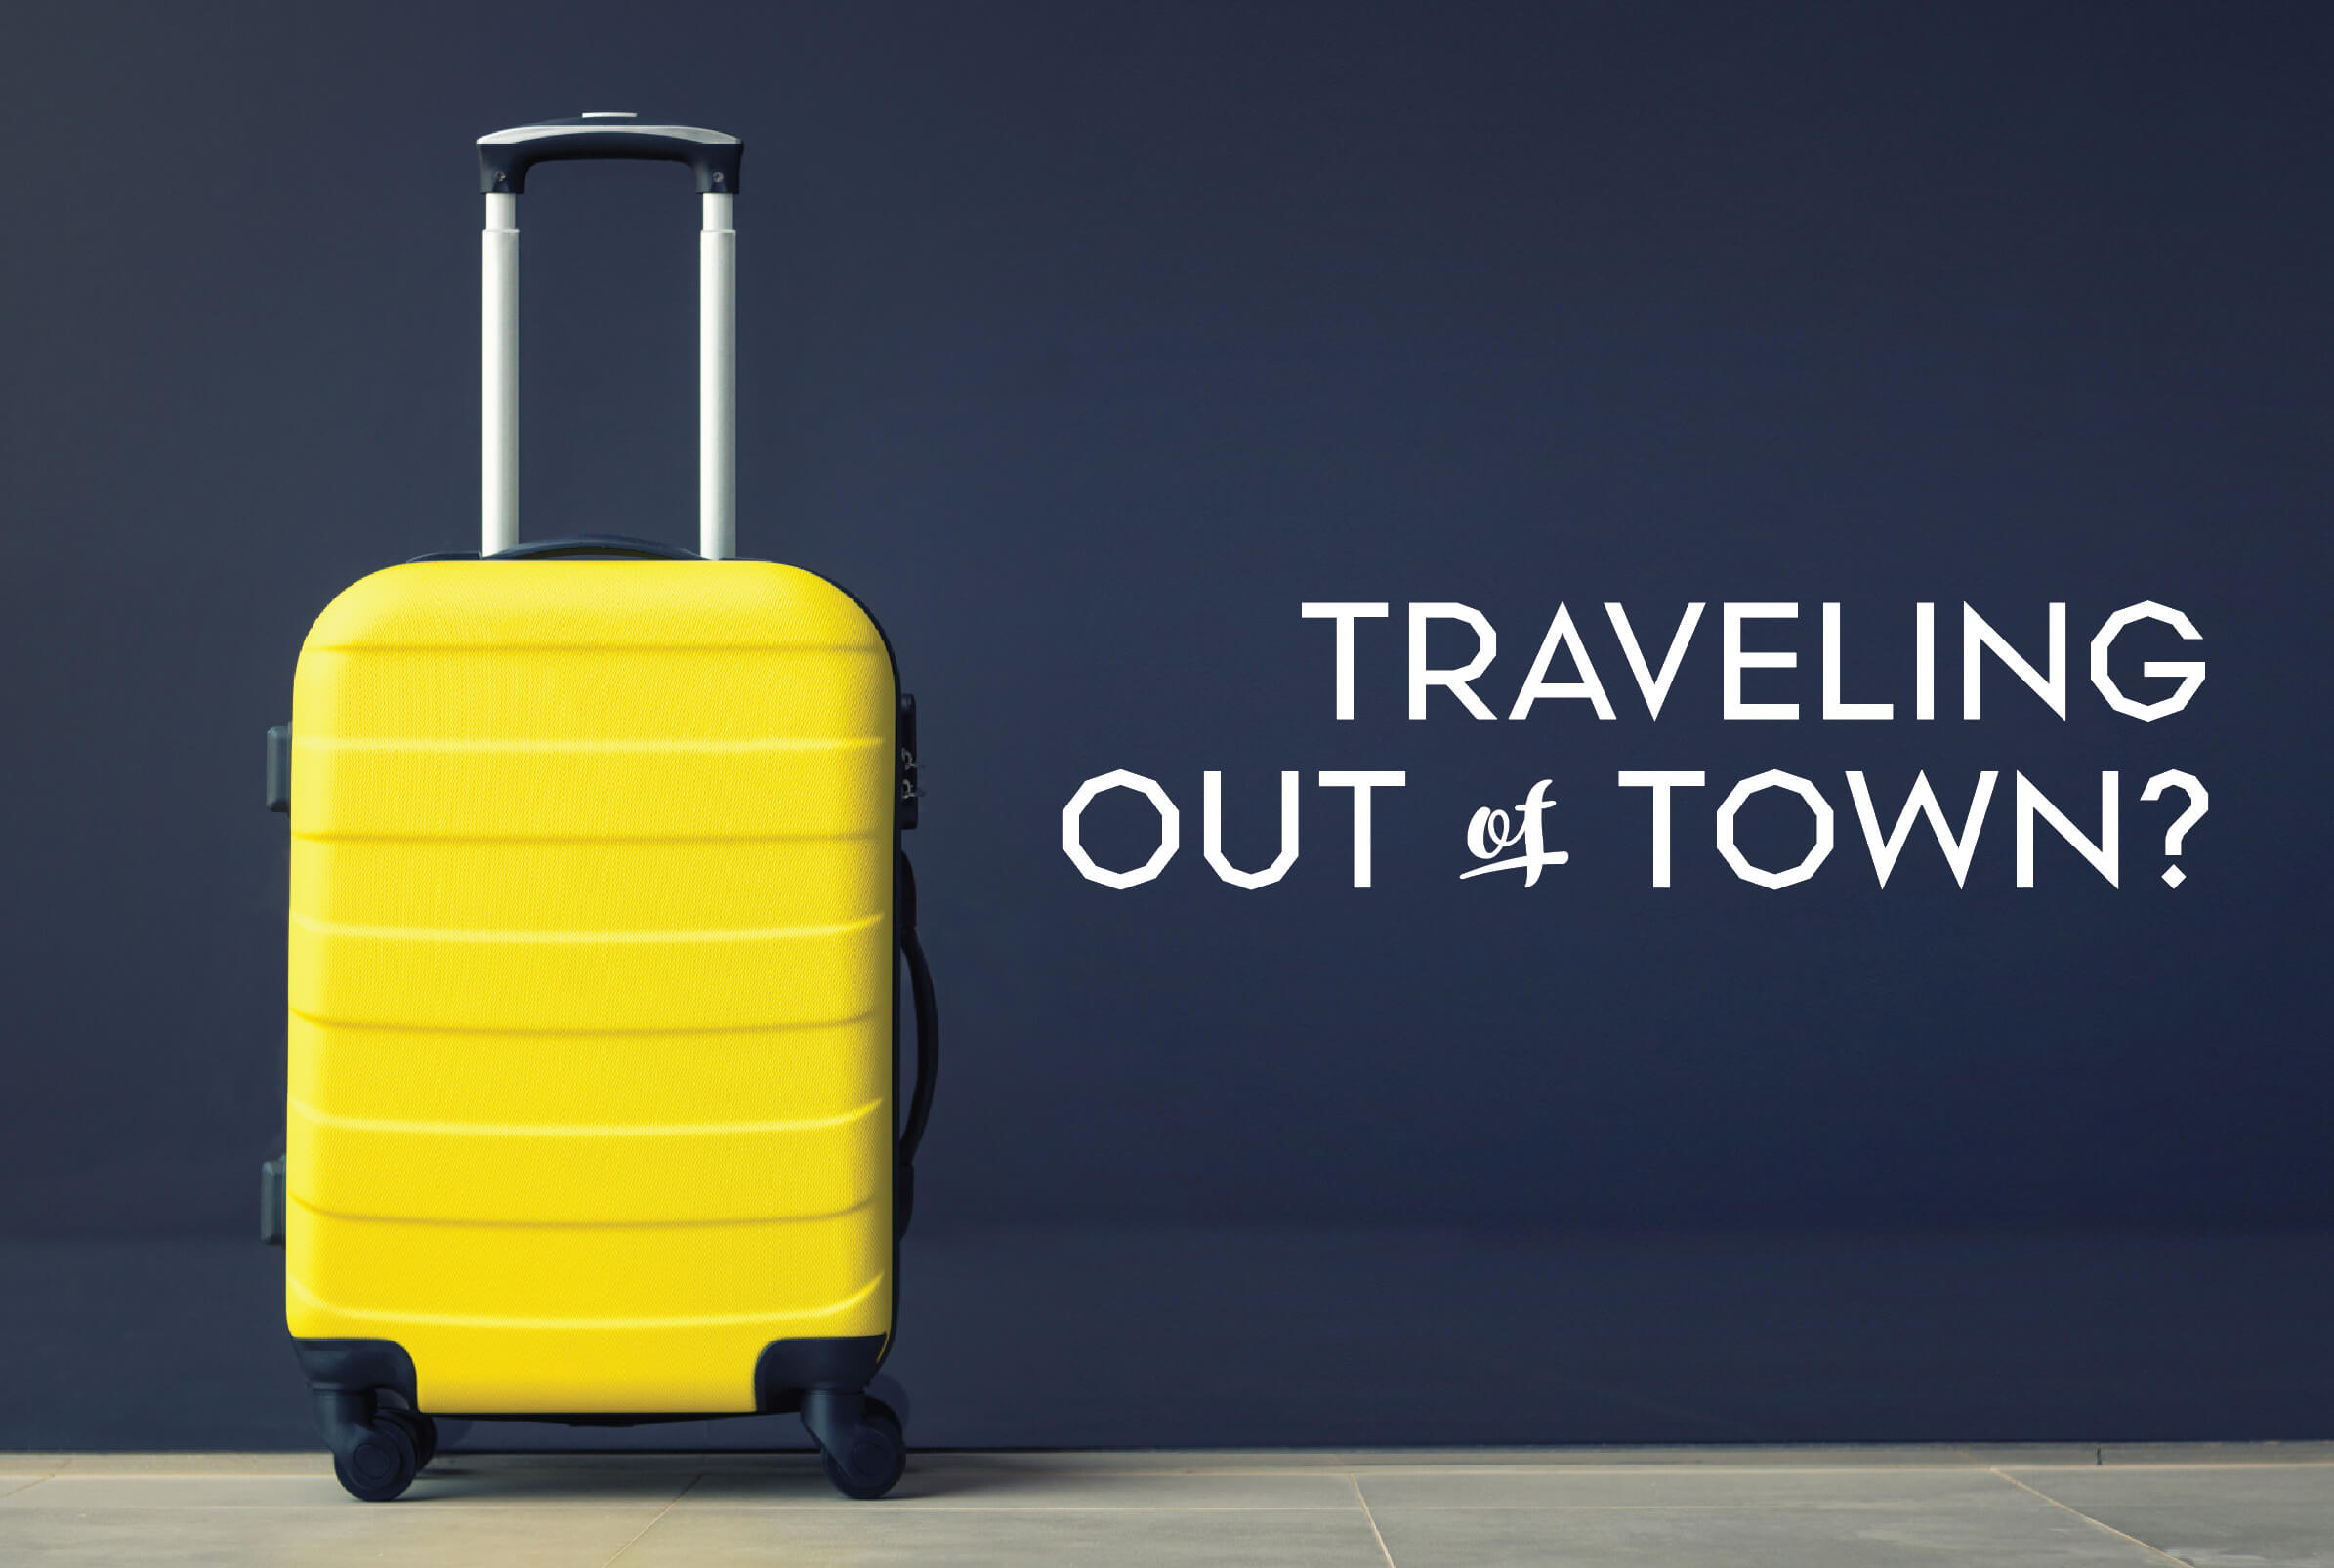 Traveling Out of Town?